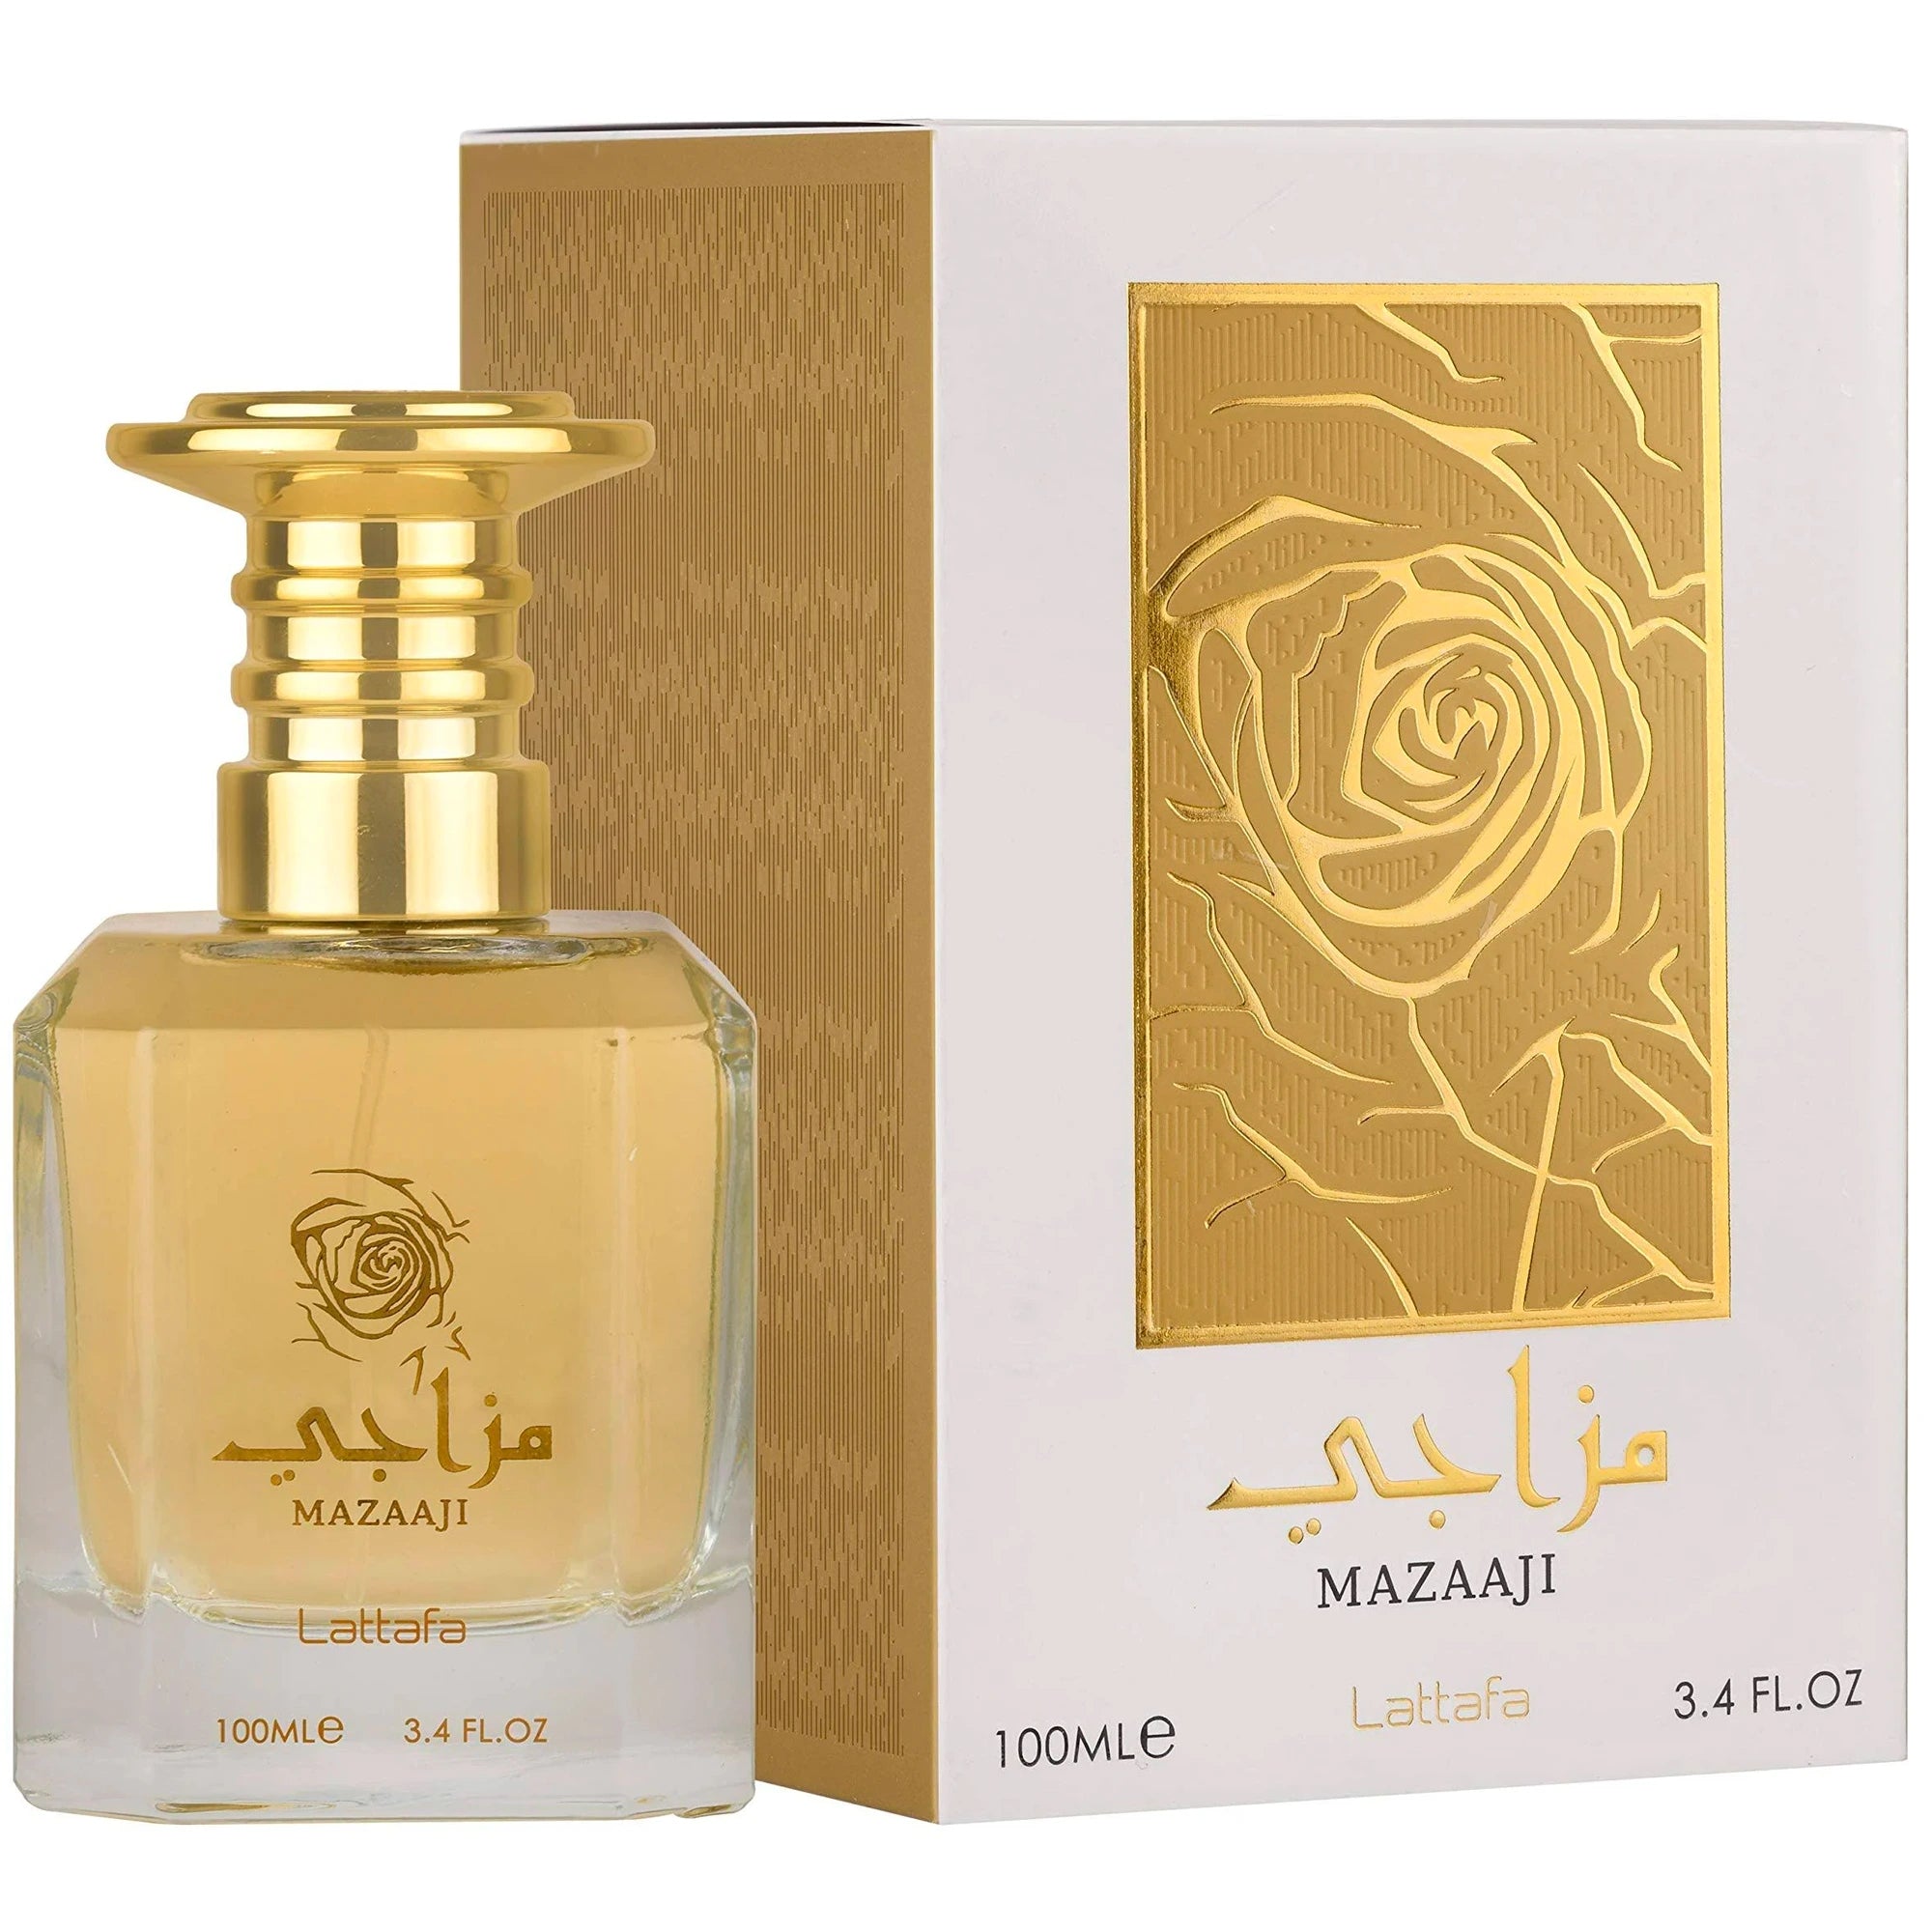 <p><em>﻿INSPIRED BY</em> <strong>BRYEDO YOUNG ROSE</strong></p>
<p>Mazaaji Lattafa is a sophisticated unisex EDP that blends intense floral top notes with a heart of Turkish rose and Bulgarian rose. The deep musky base brings a softly rounded finish, enhanced with hints of exotic vanilla. An intensely evocative fragrance that is sure to become a favorite.</p>